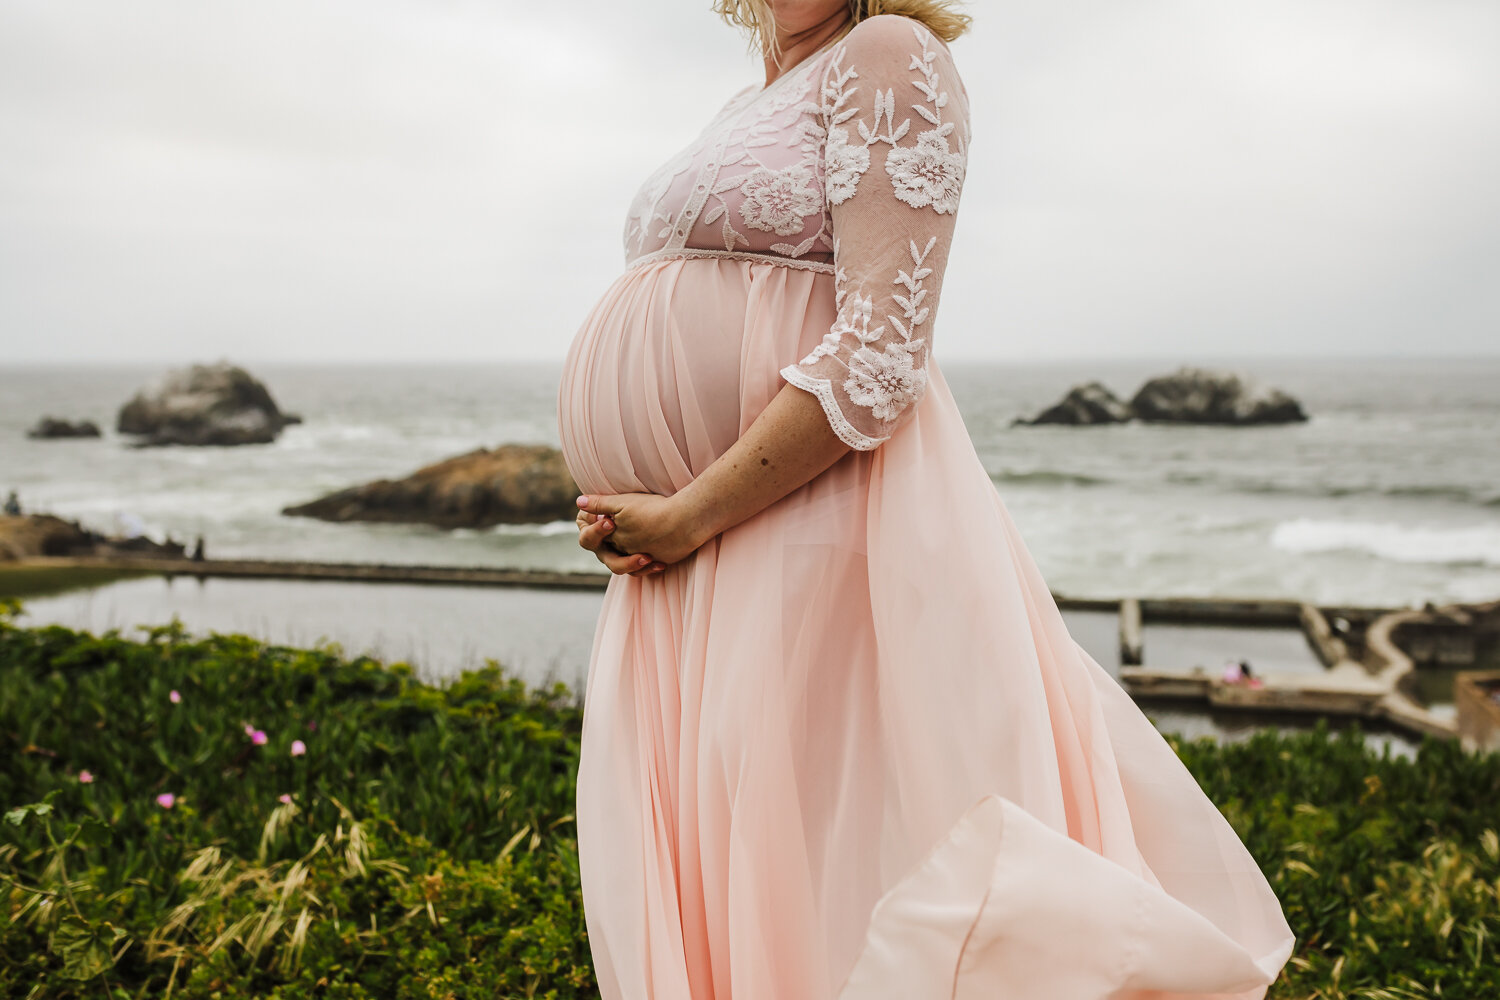 Pregnant woman holding her baby bump with dress blowing in wind standing above ocean - San Francisco Maternity Photographer